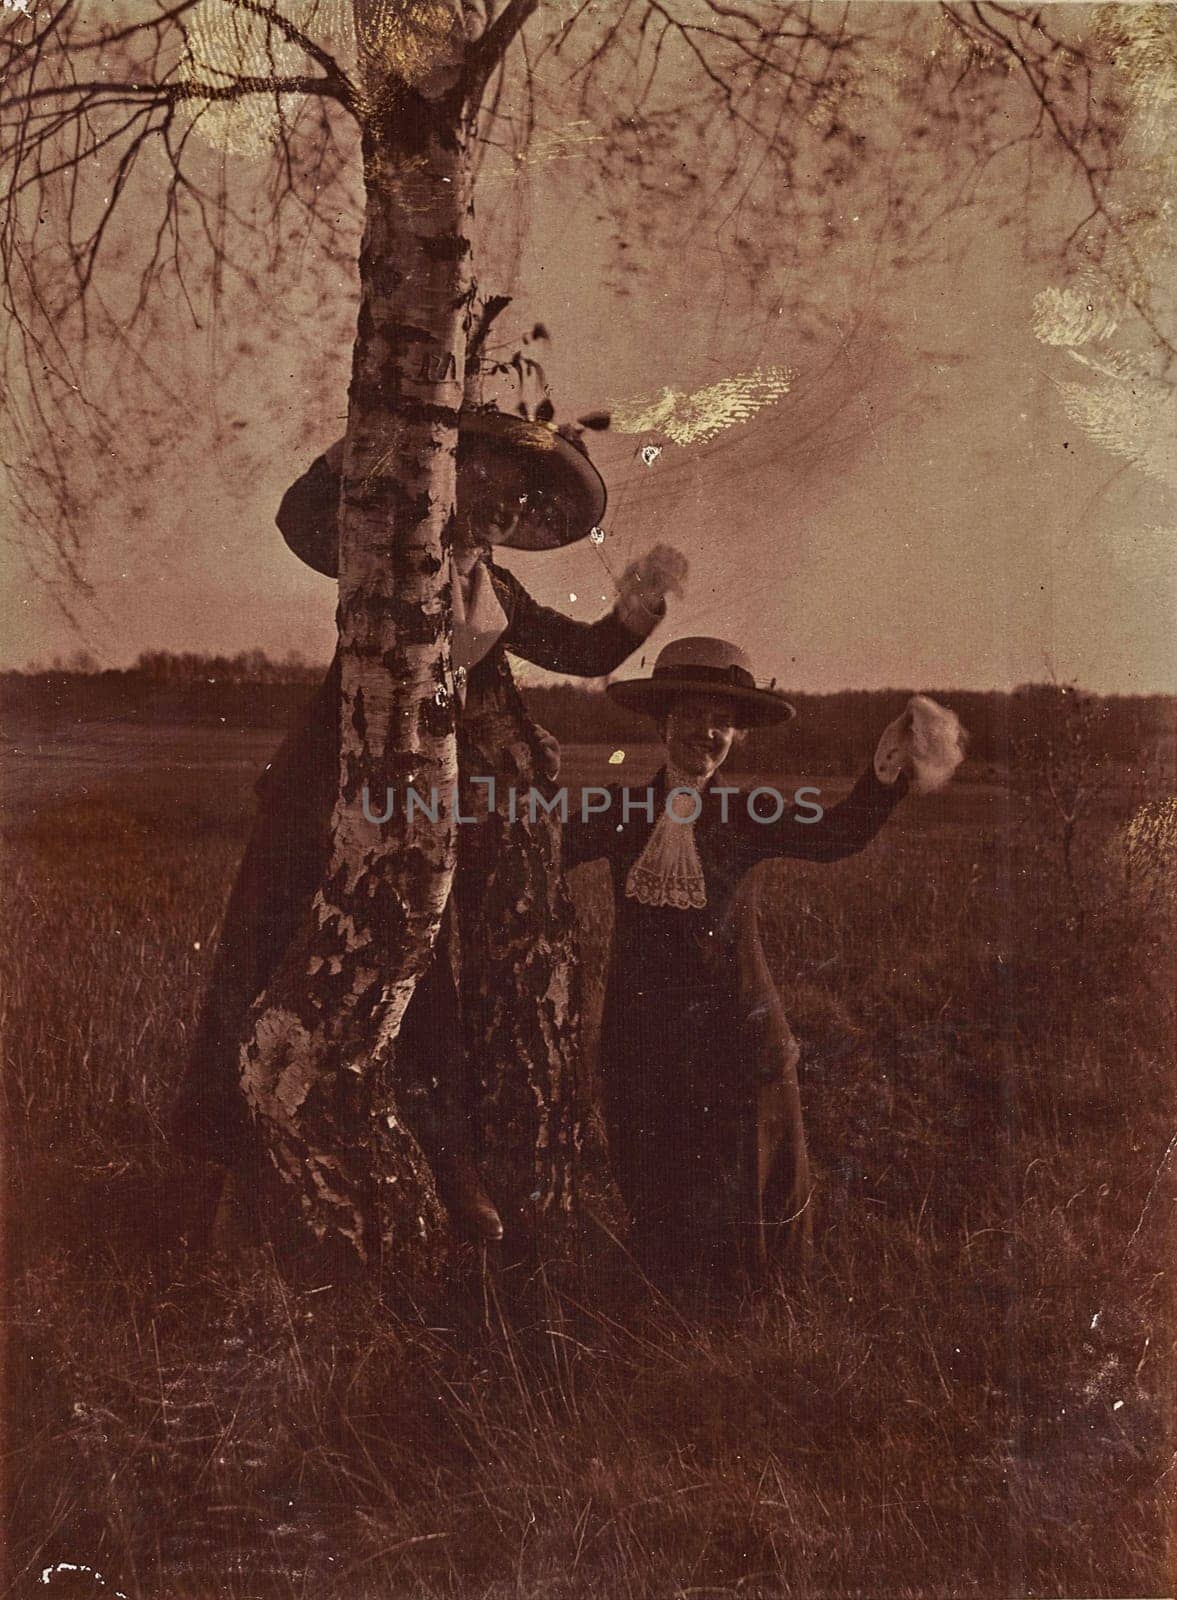 Vintage photo shows two ladies outdoor. Photo with sepia effect and has fingerprints imperfection. Black and white photography. by roman_nerud